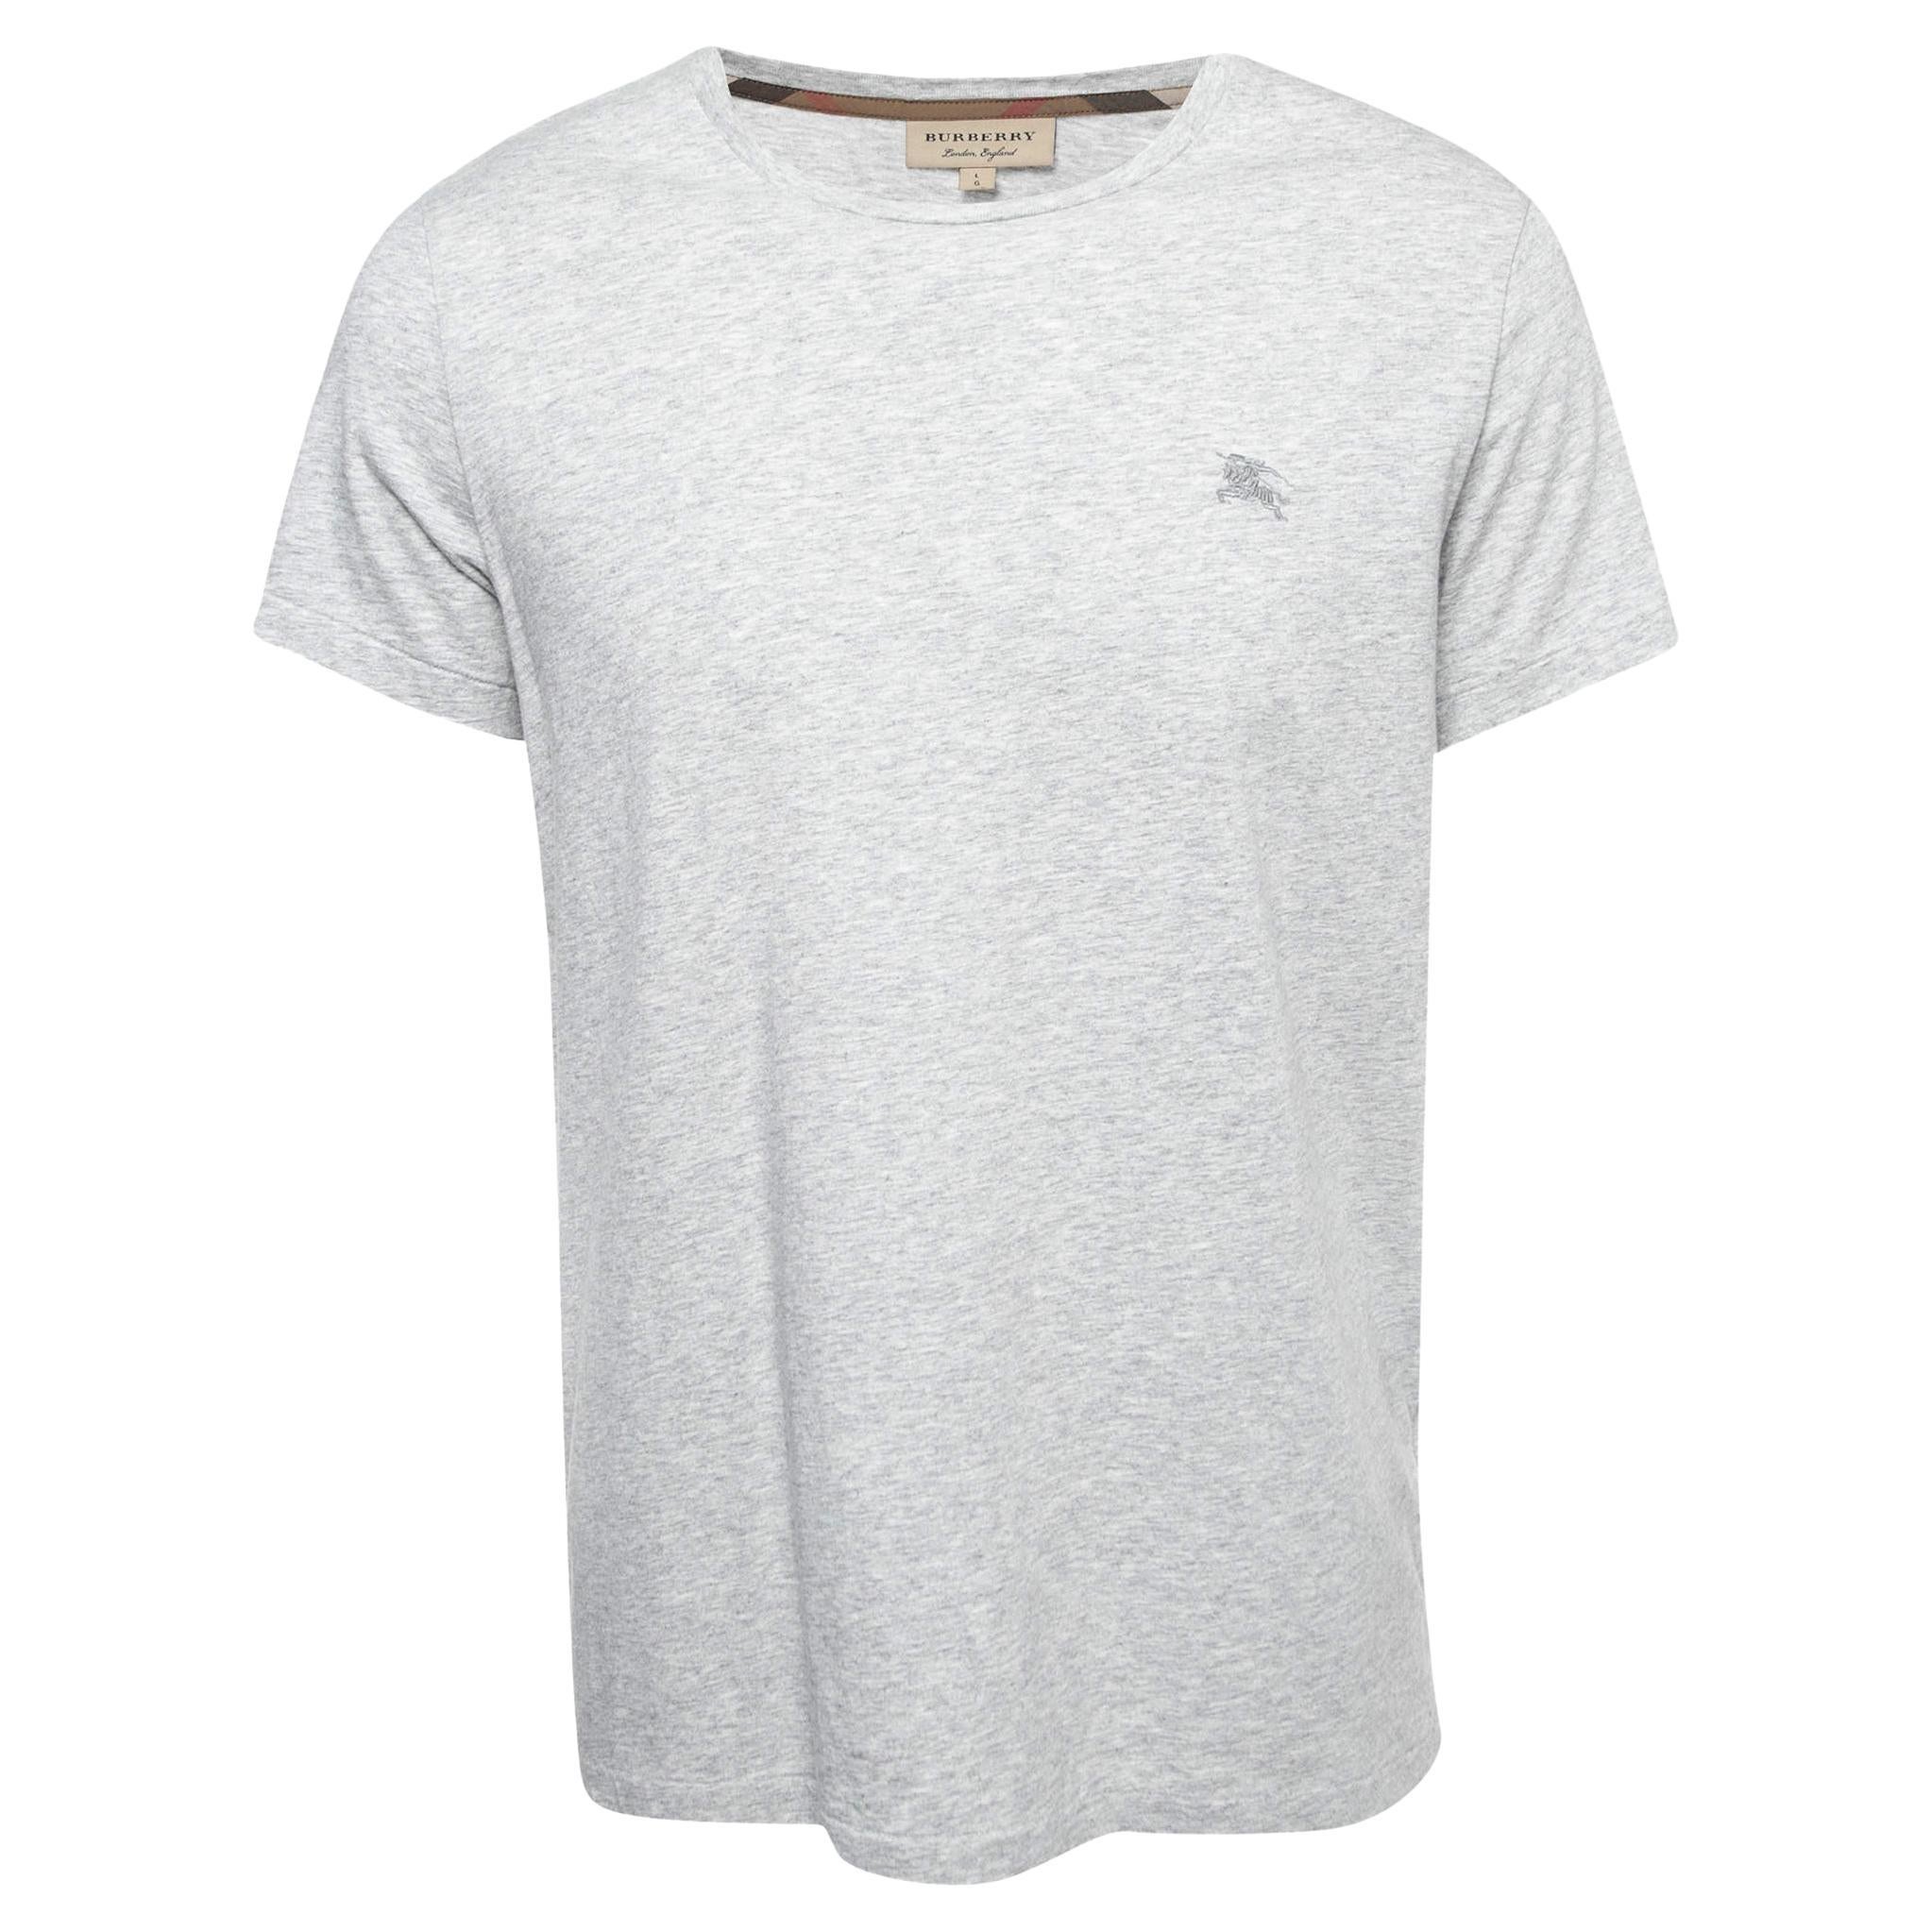 Burberry Grey Logo Embroidered Cotton Half Sleeve T-Shirt L